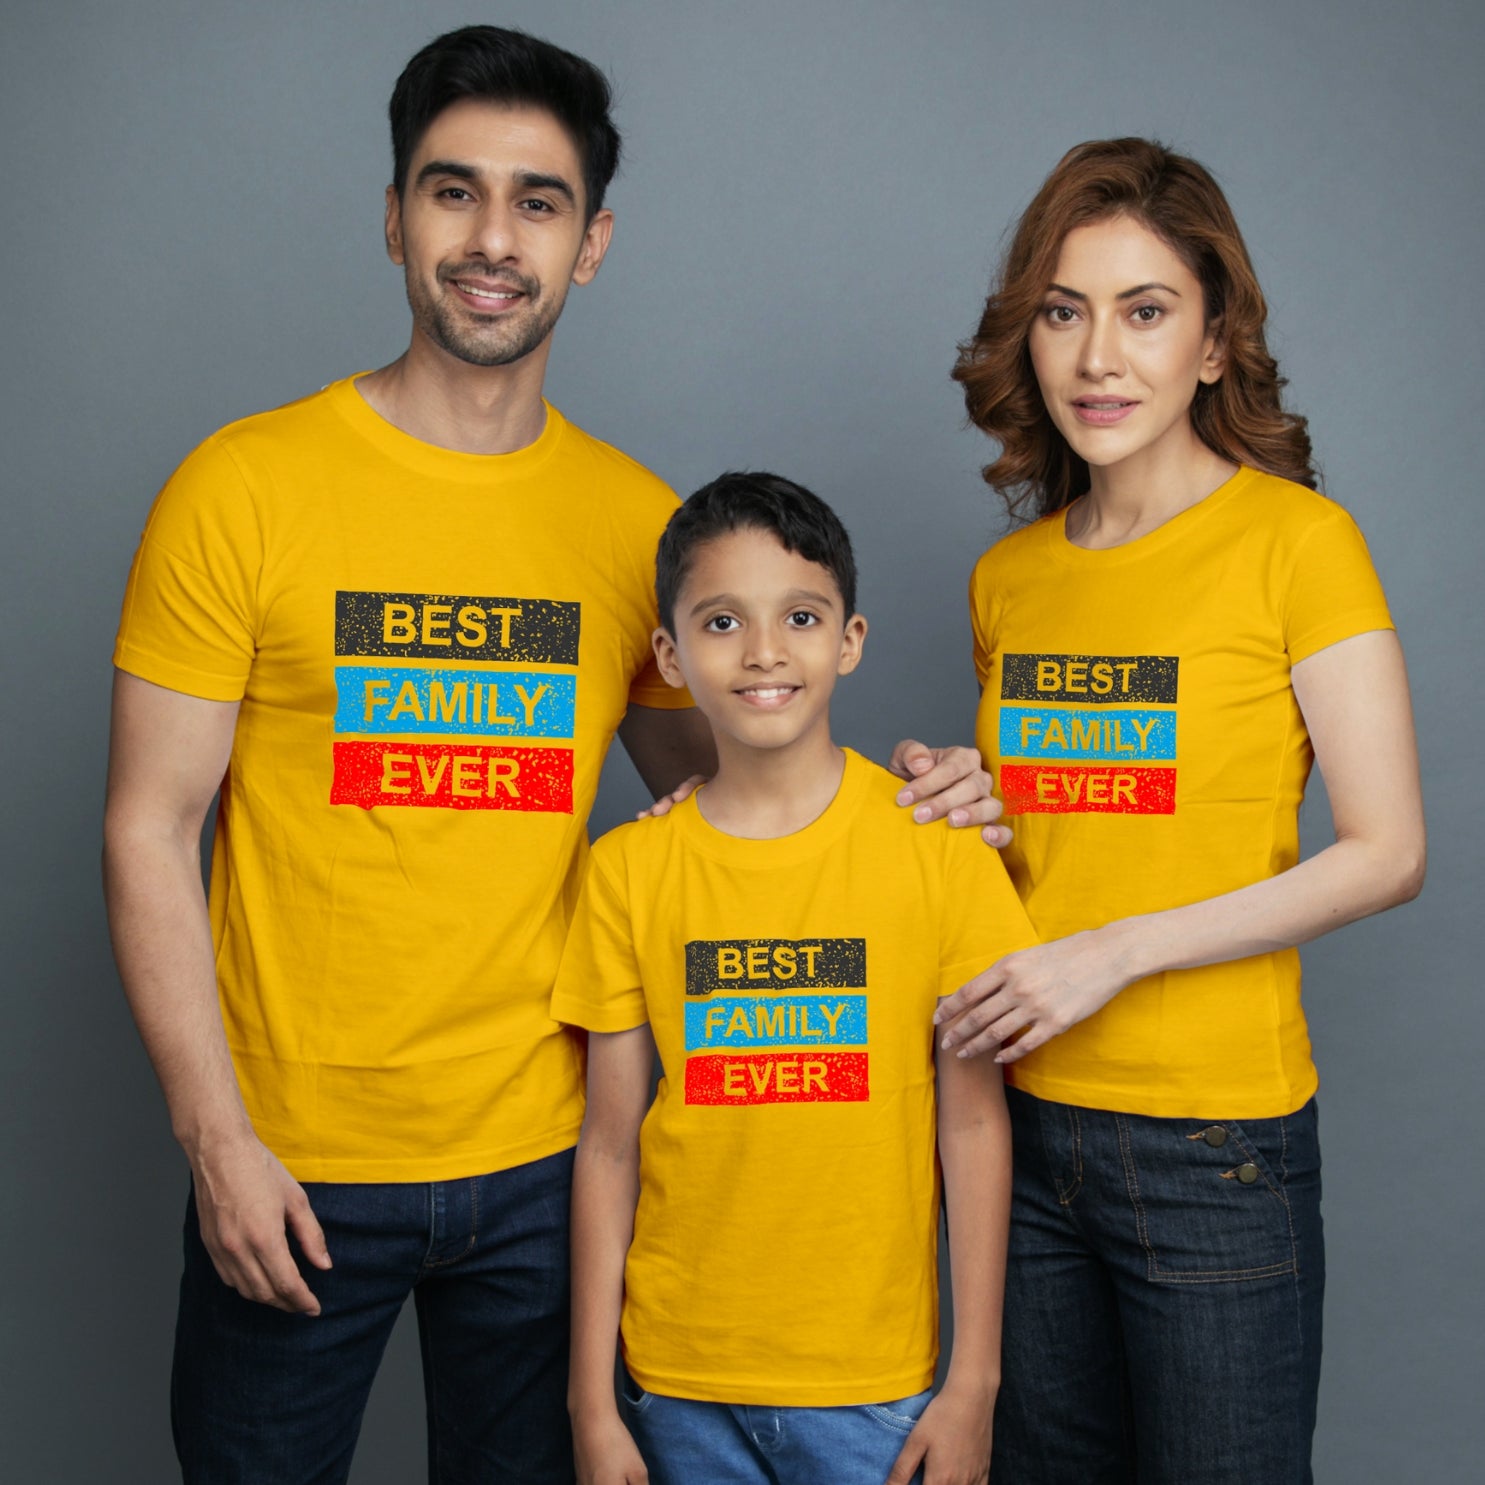 Family t shirt set of 3 Mom Dad Son in Yellow Colour - Best Family Ever Variant